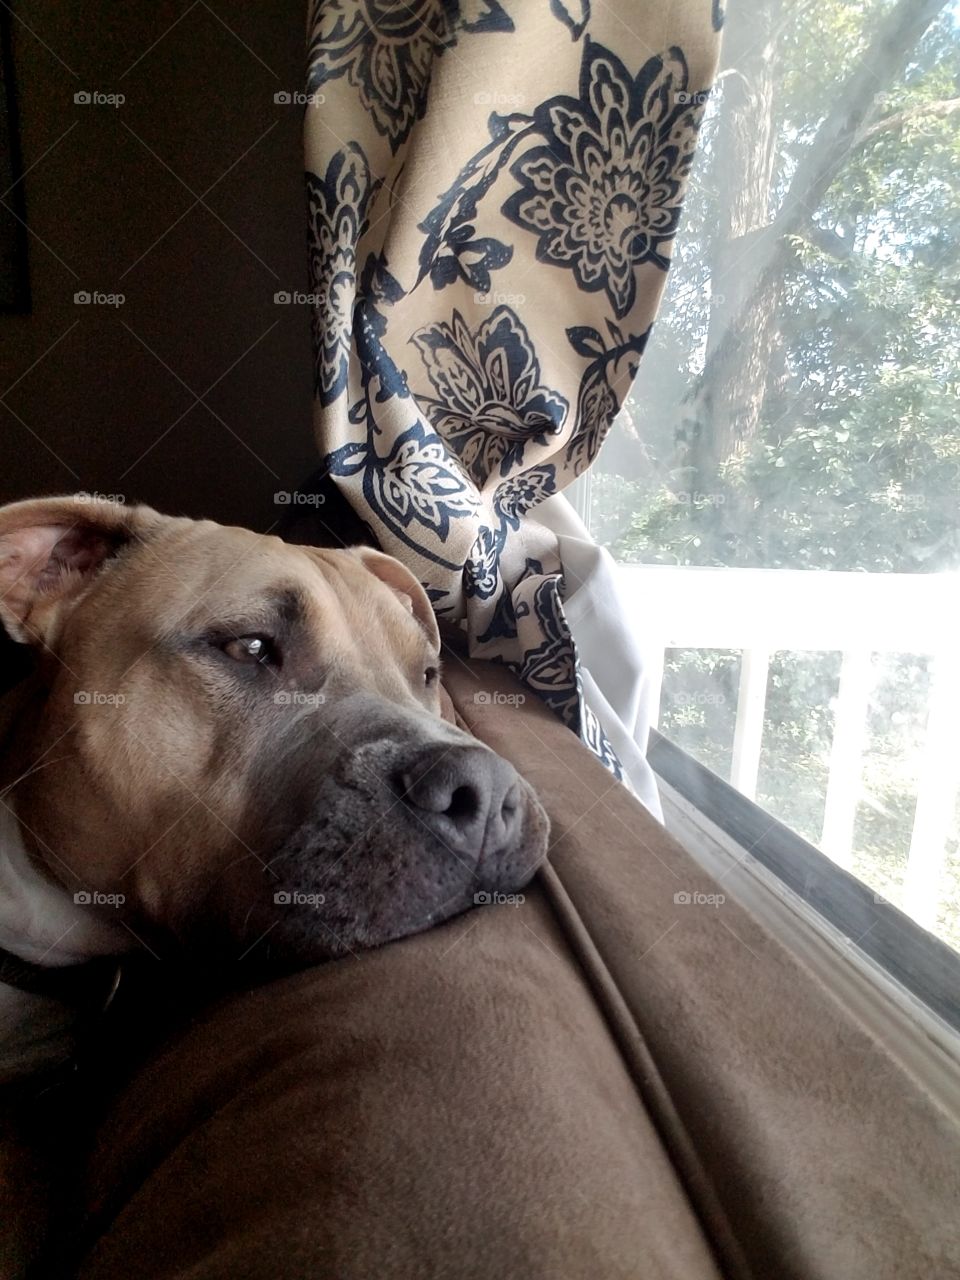 Pitbull dog looking out window from couch resting his head